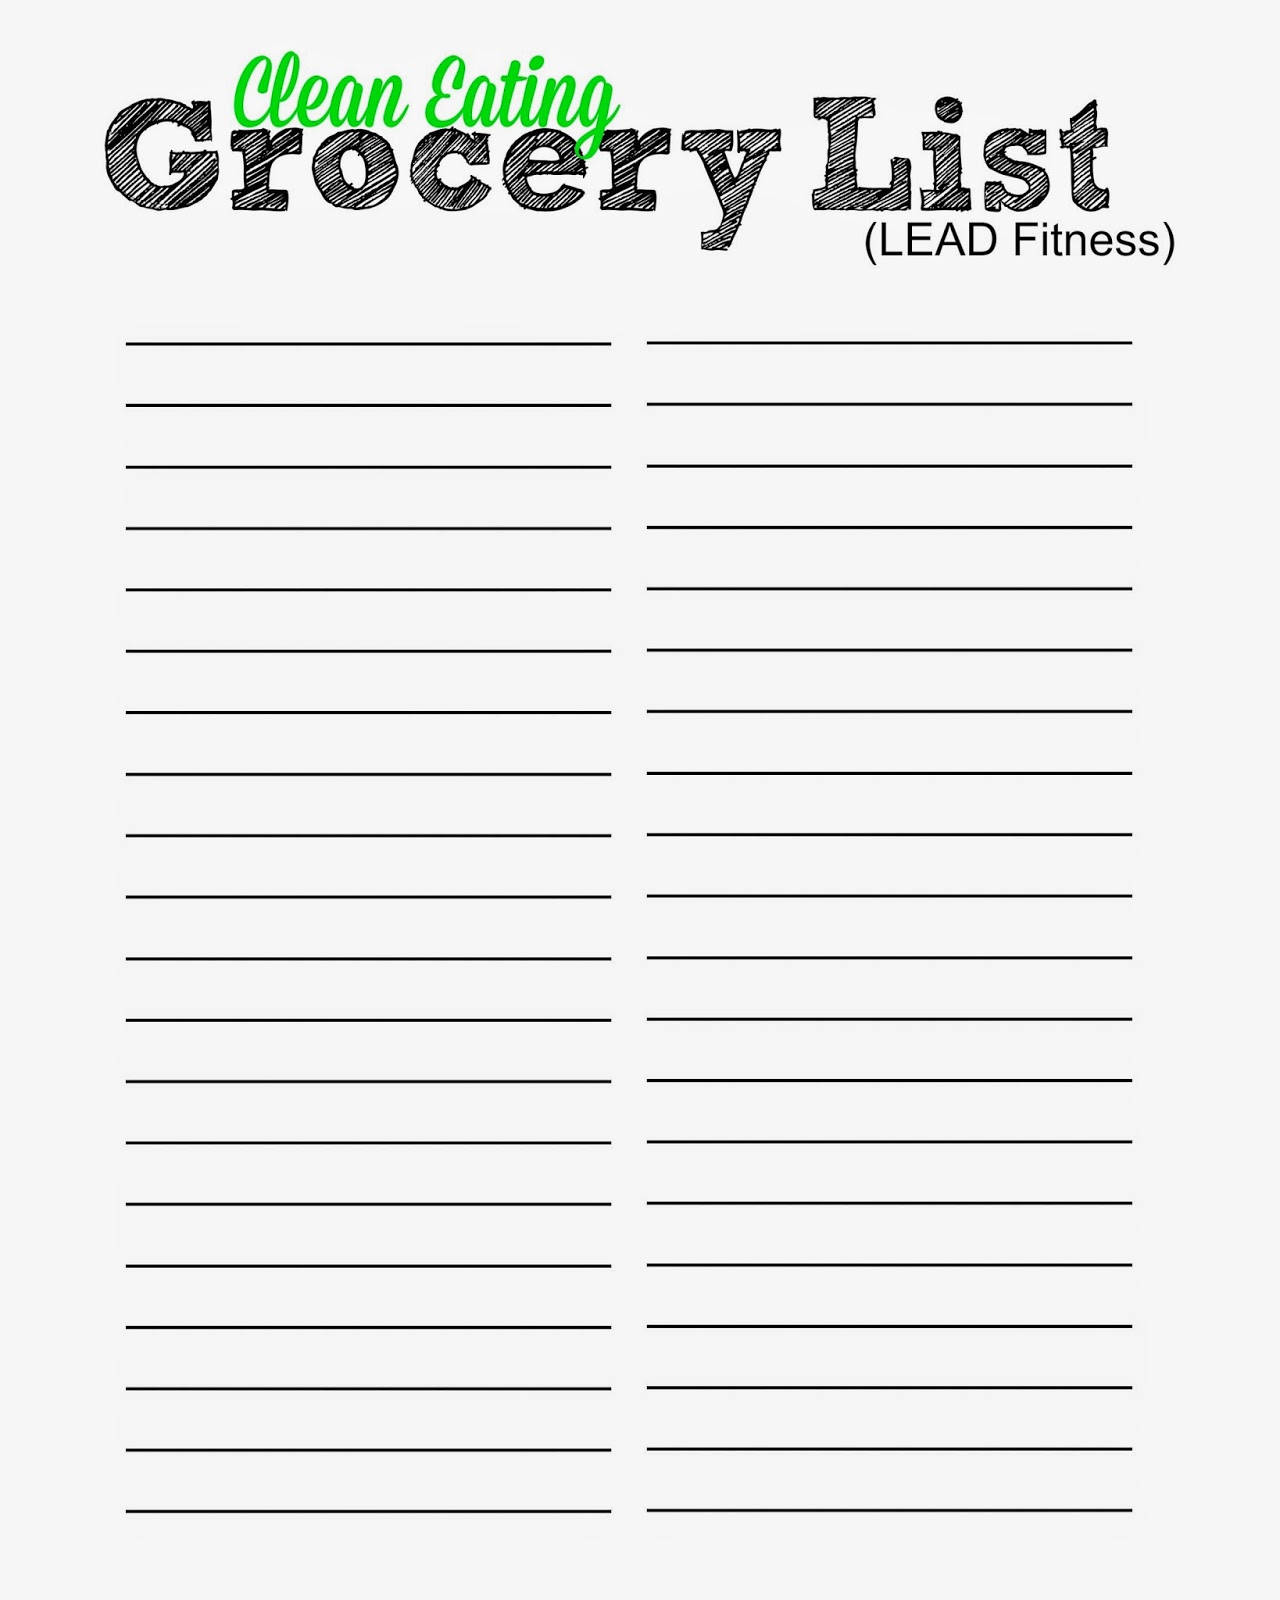 blank-grocery-list-white-gold